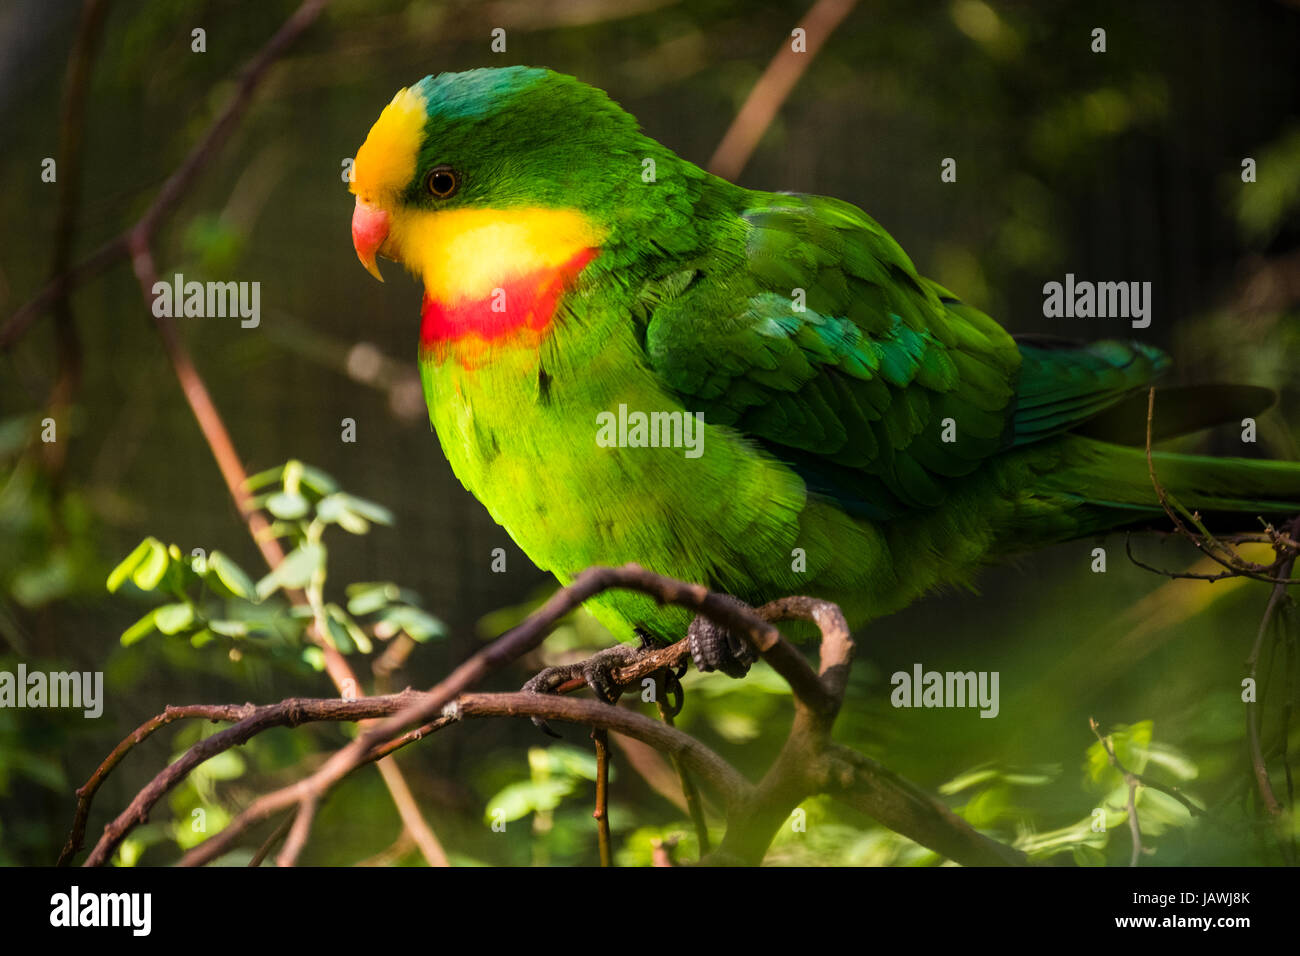 A colourful yellow and red Superb Parrot roosting in a tree. Stock Photo